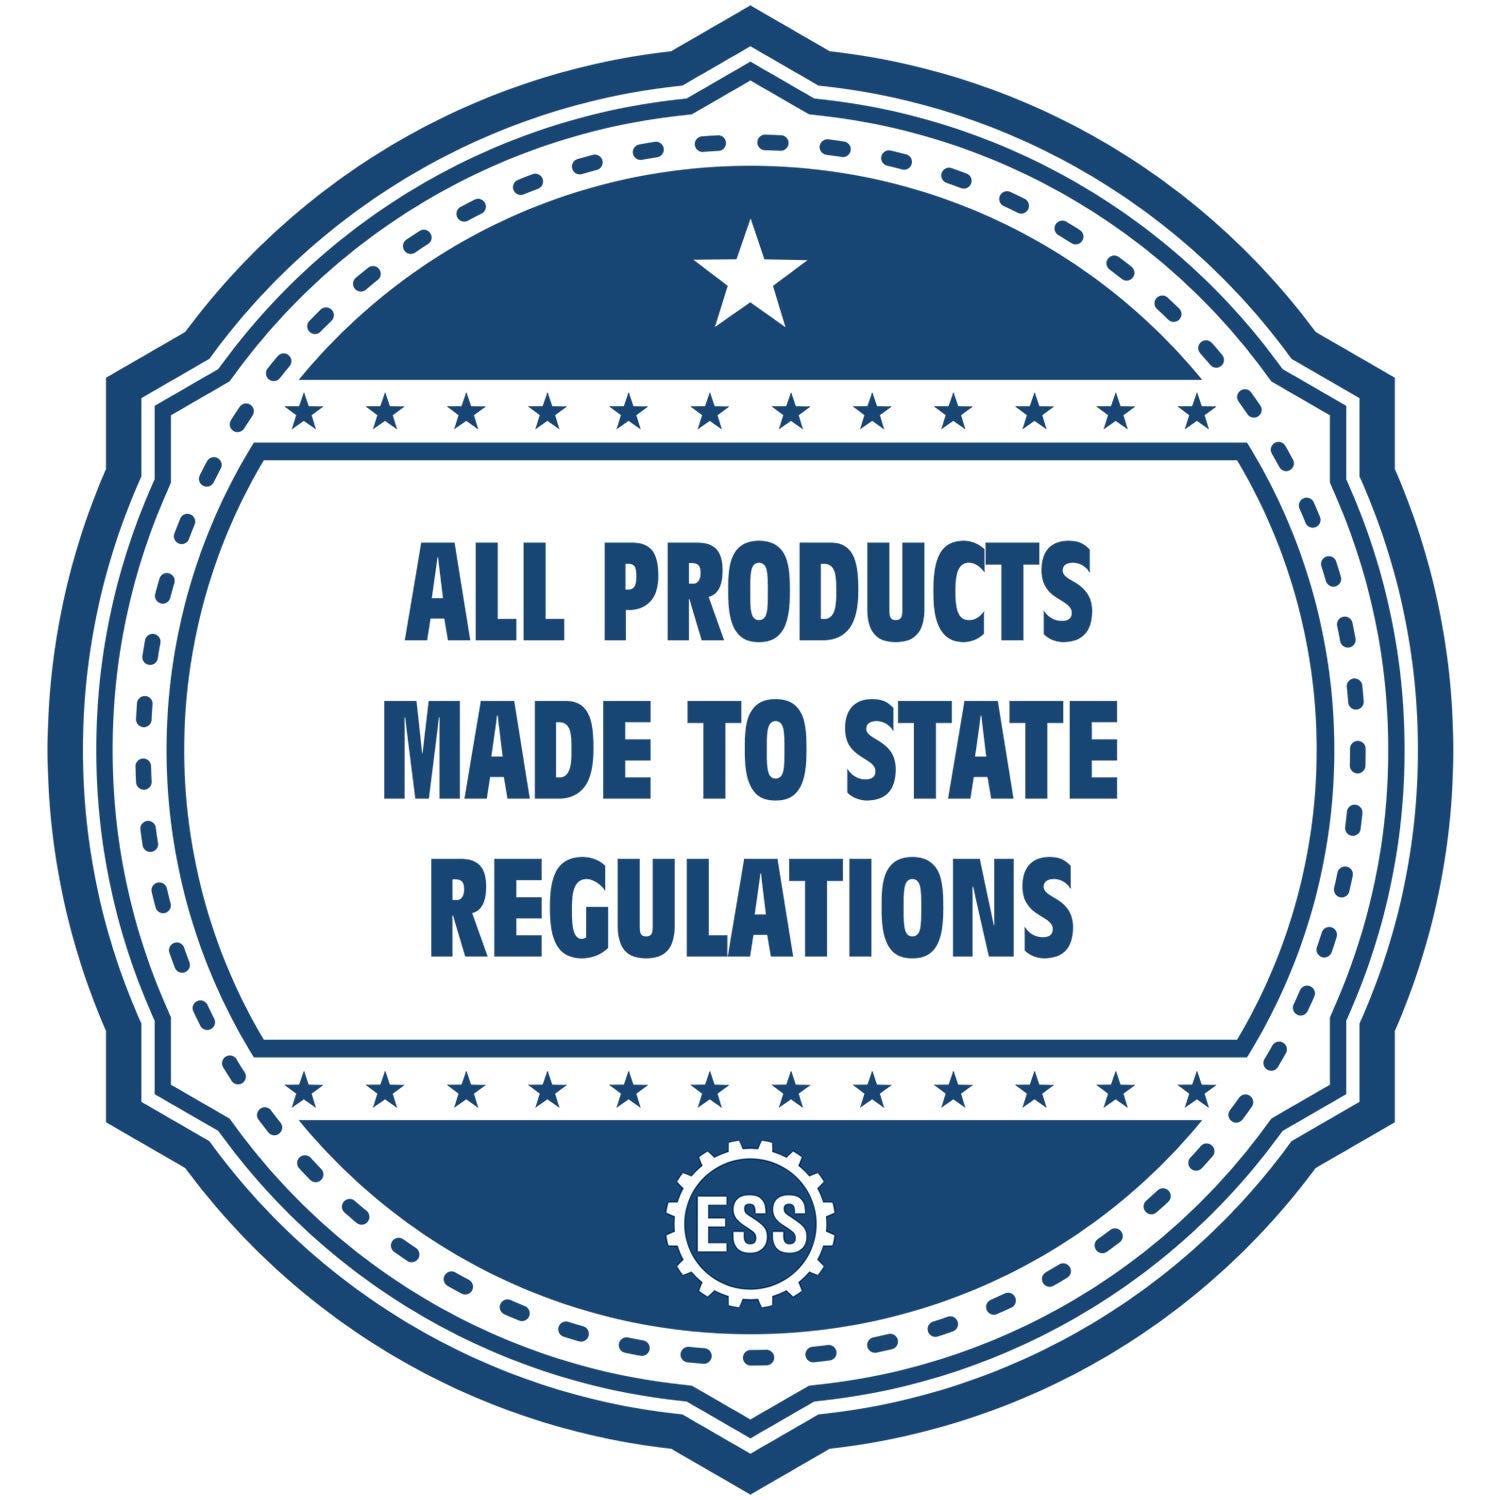 An icon or badge element for the Premium MaxLight Pre-Inked Alabama Landscape Architectural Stamp showing that this product is made in compliance with state regulations.